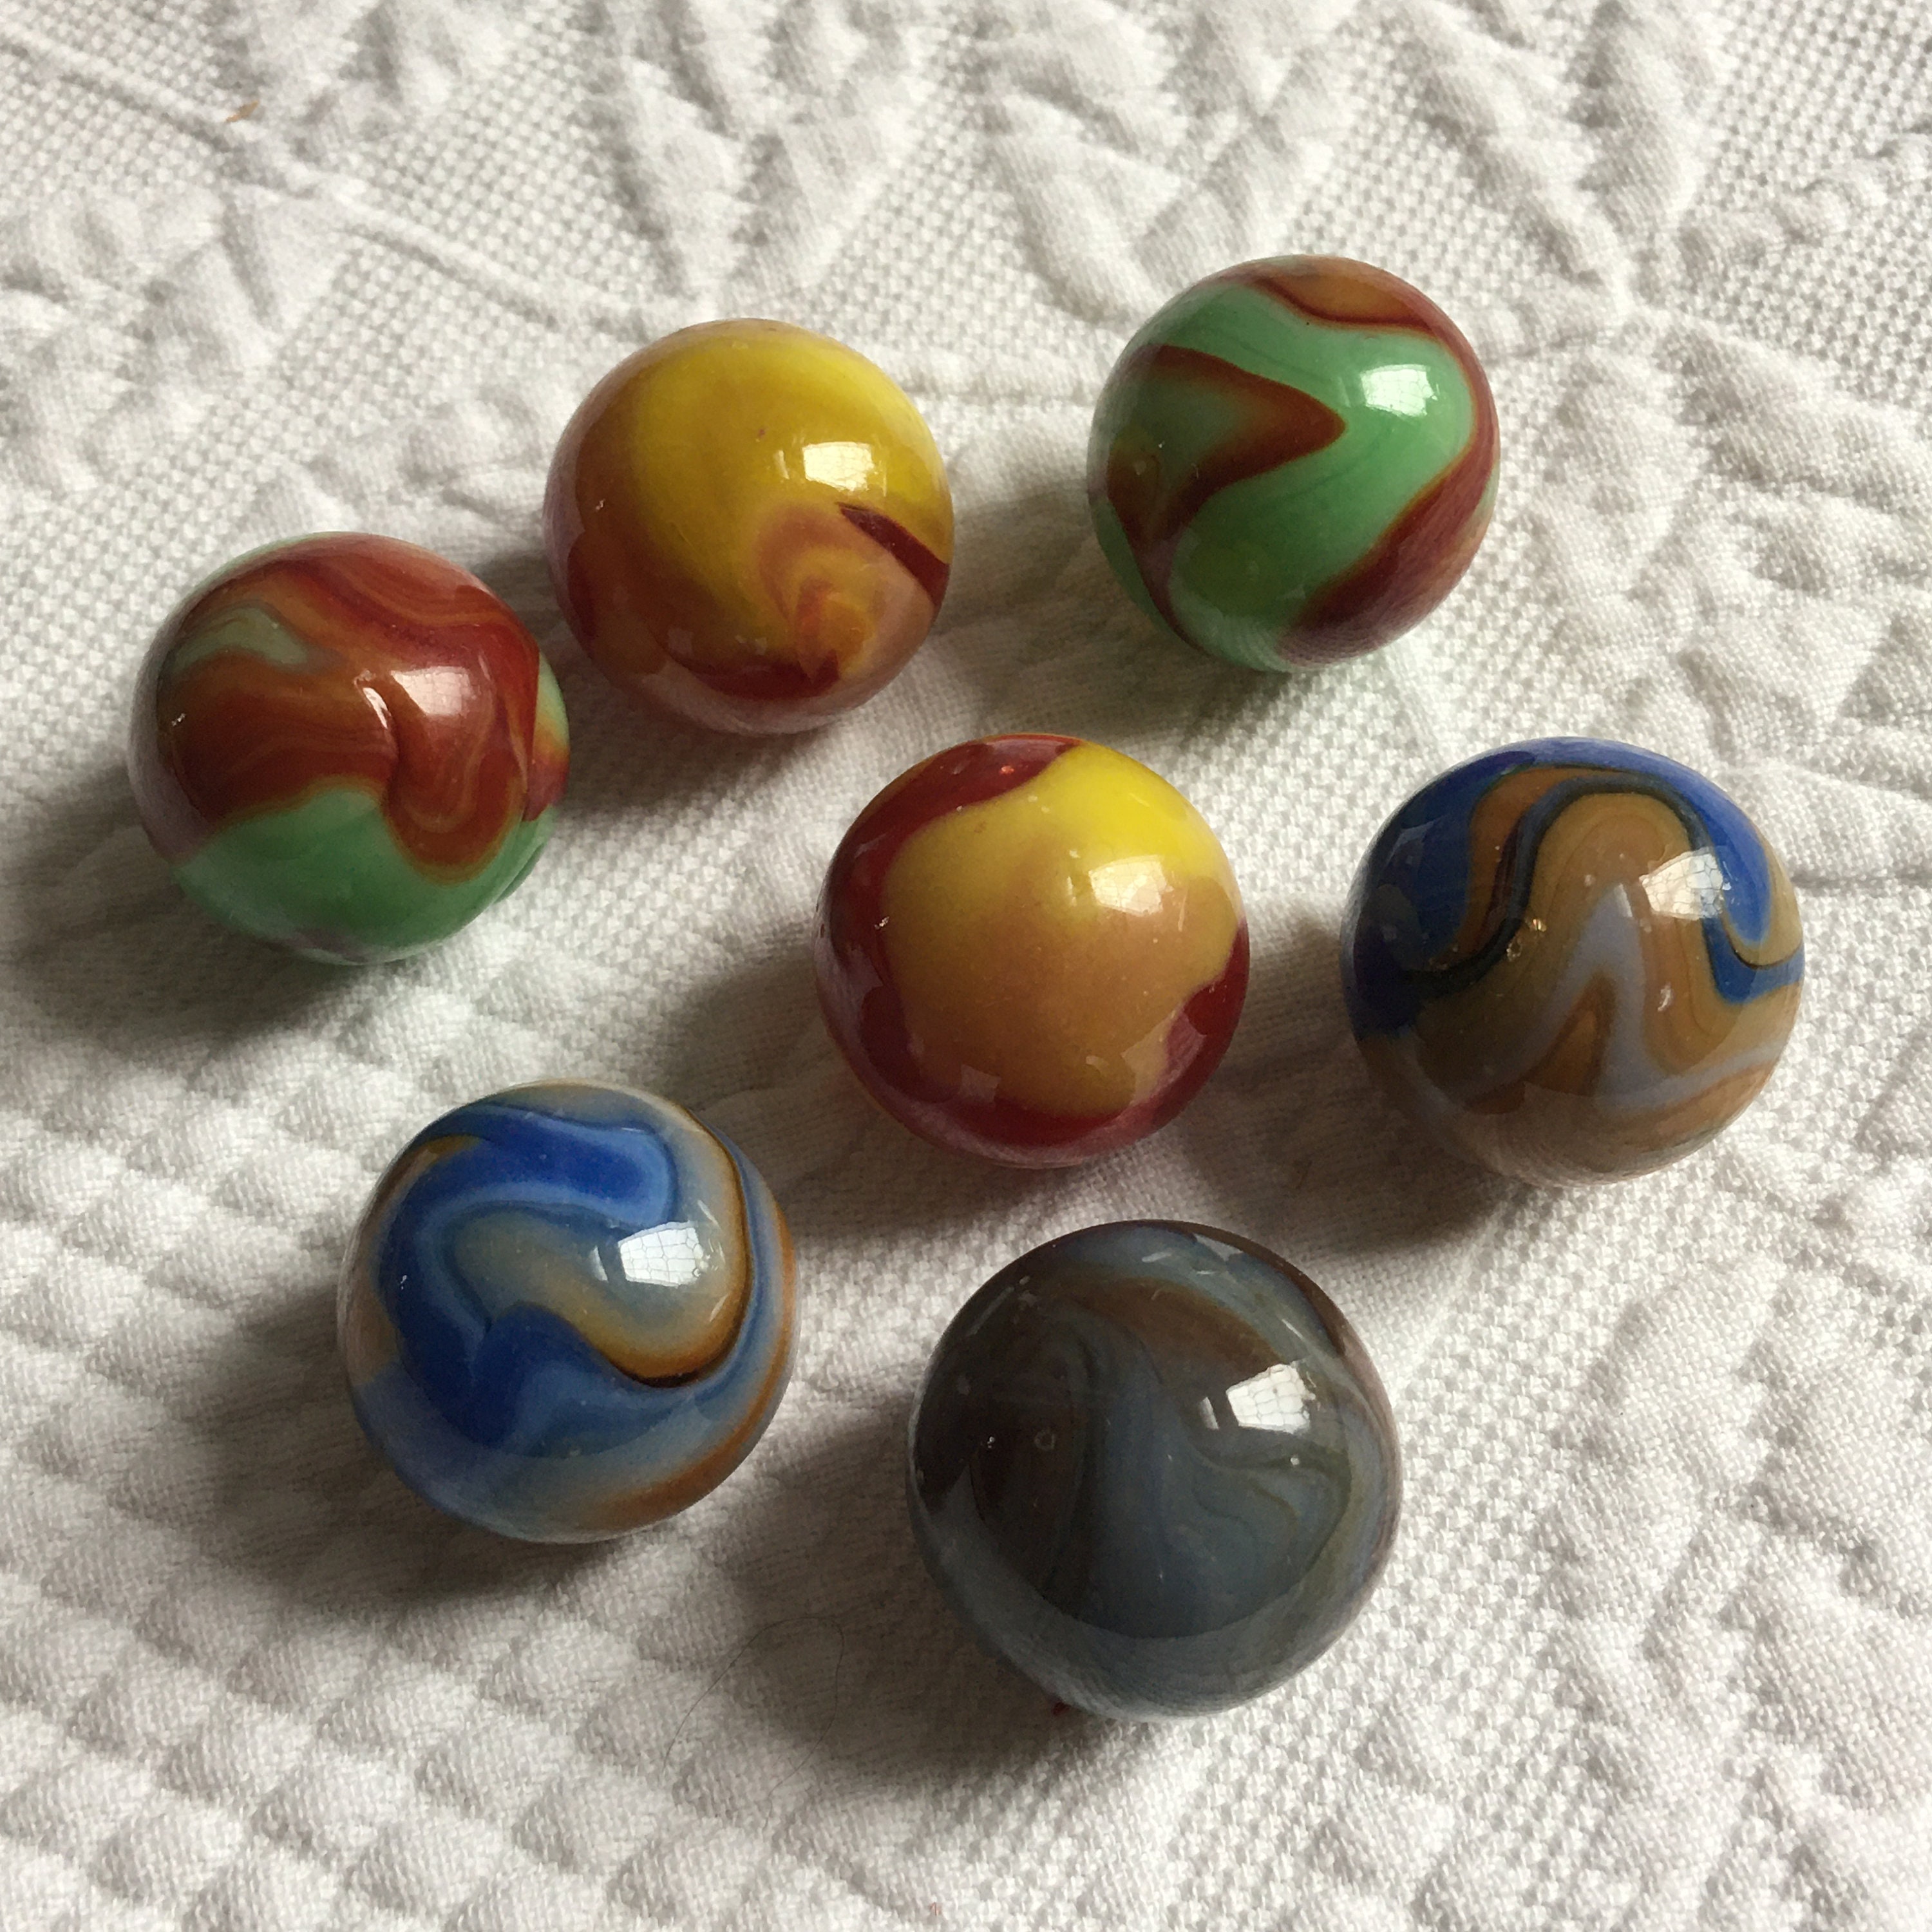 25 Glass Marbles SEAHORSE Orange/Blue Classic vtg Style Game Pack